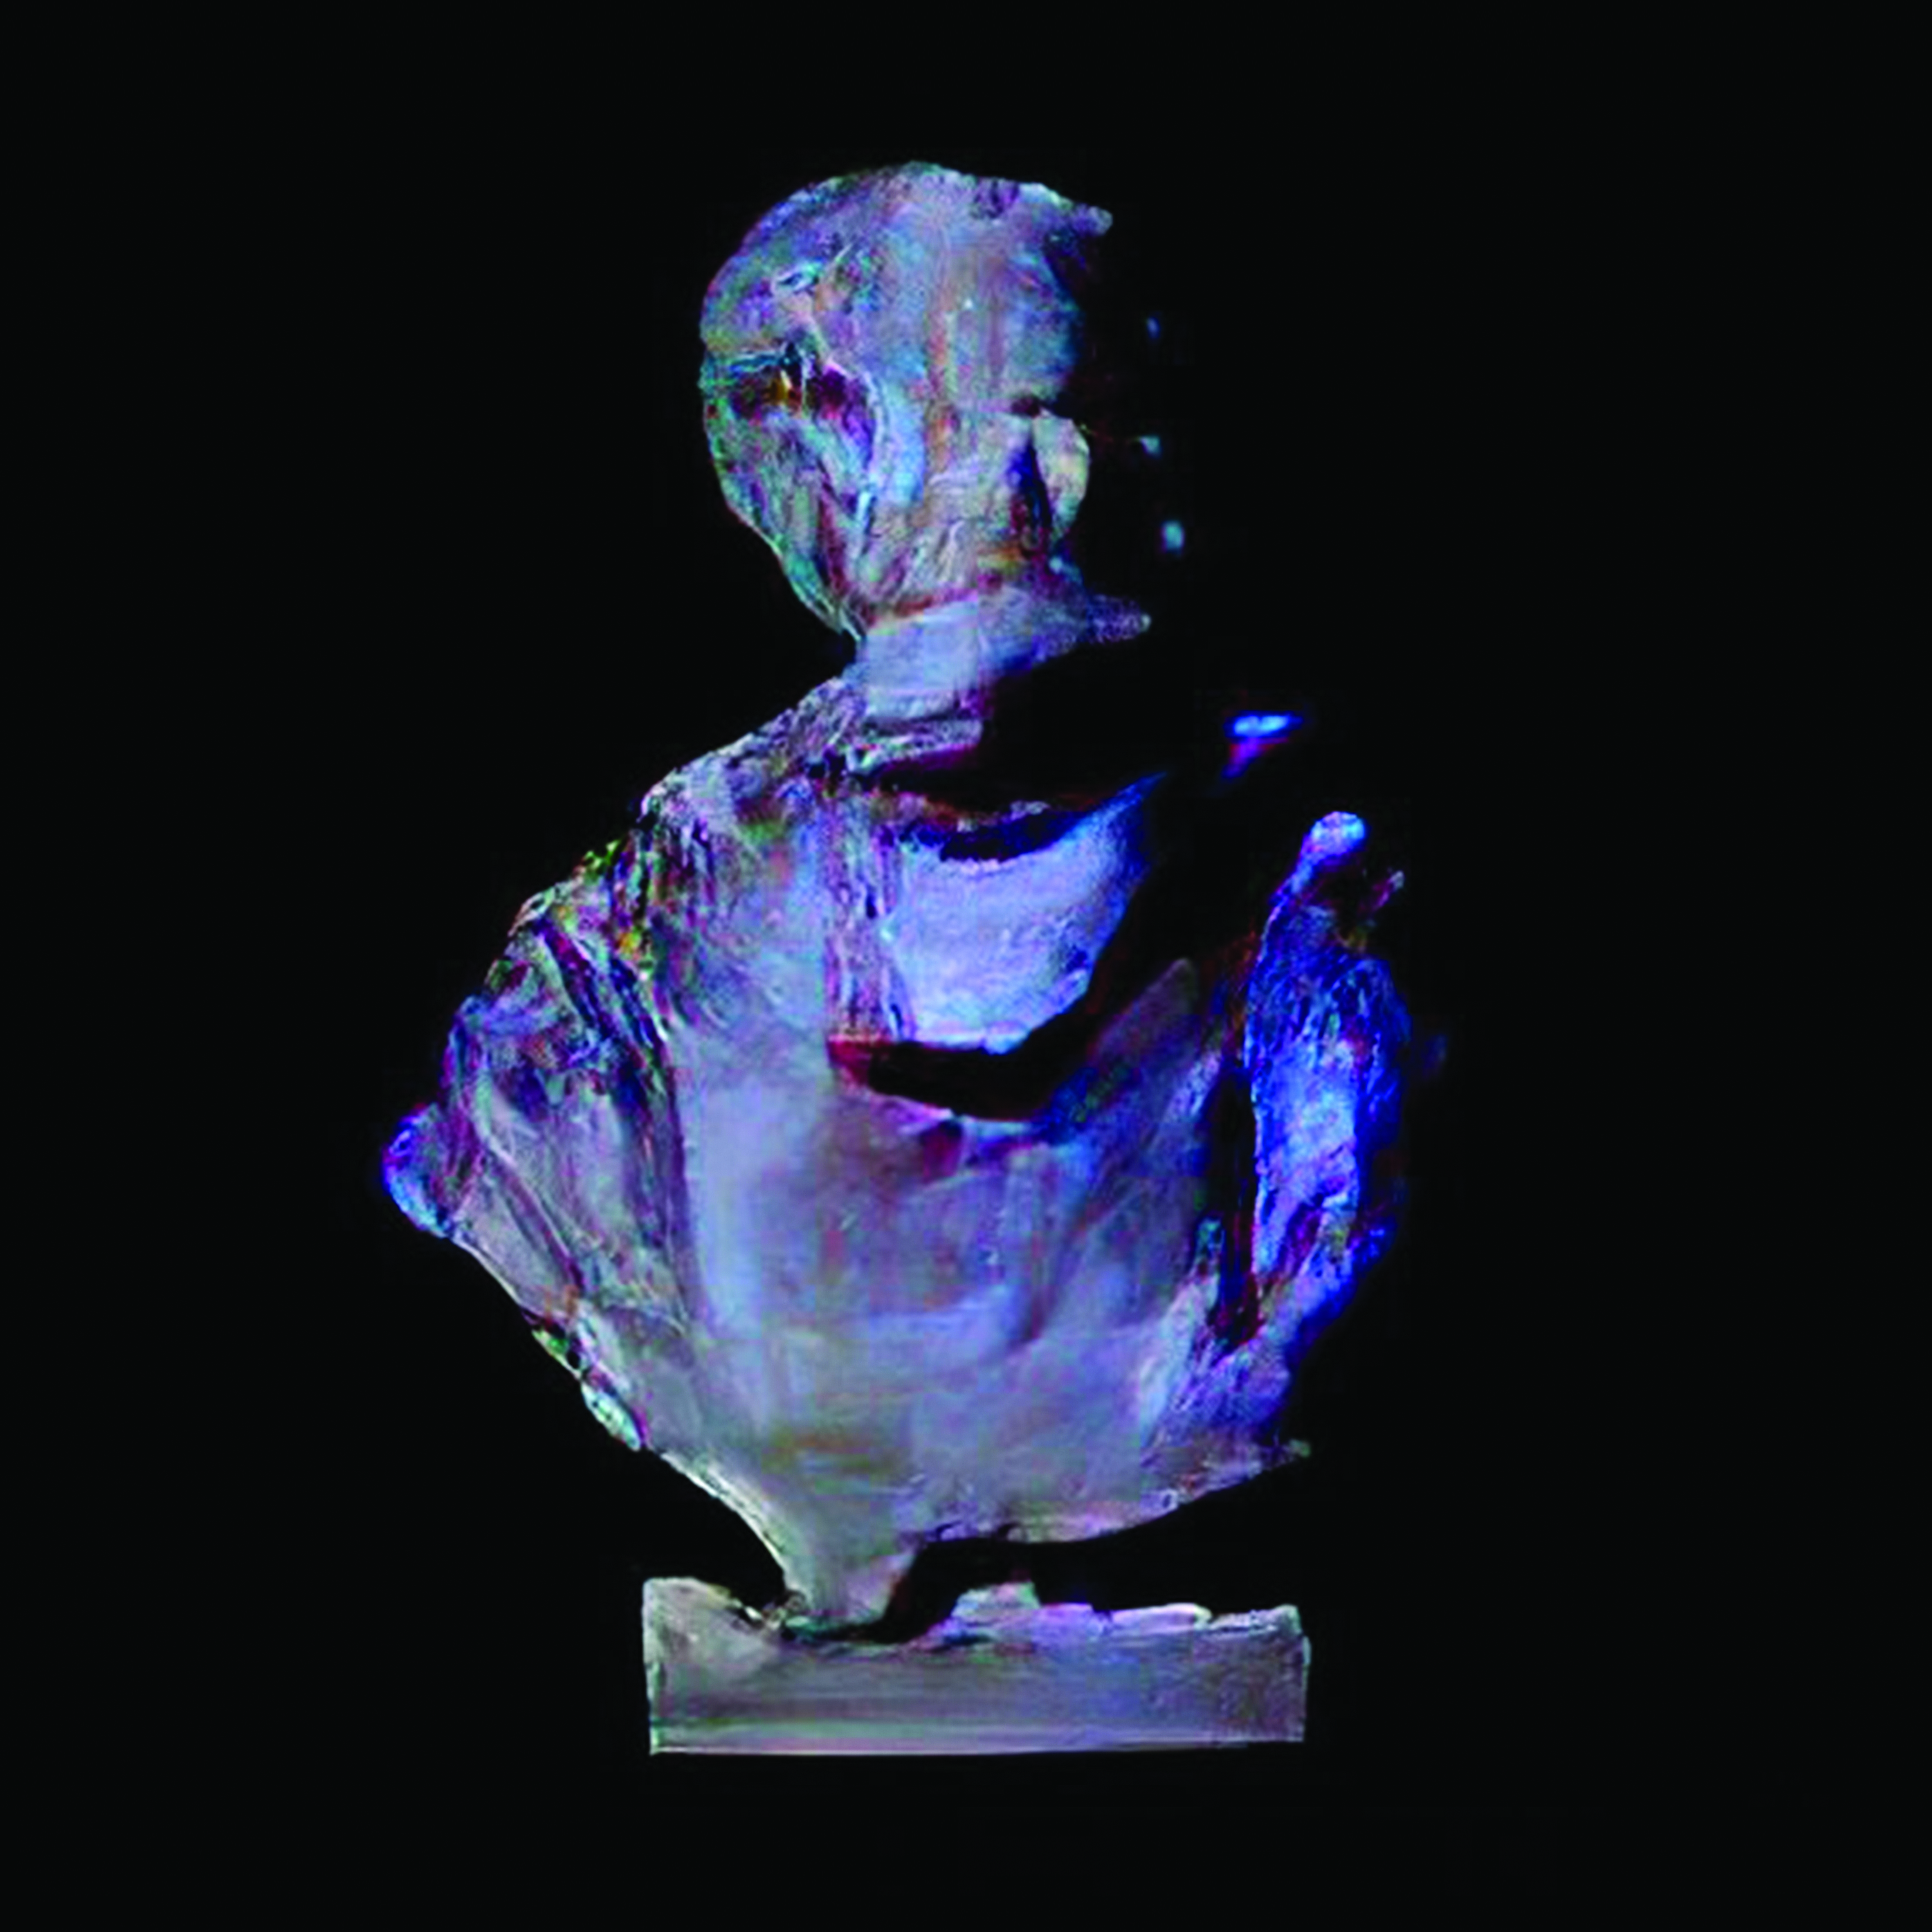 distorted digital render of a bust in blue and purple